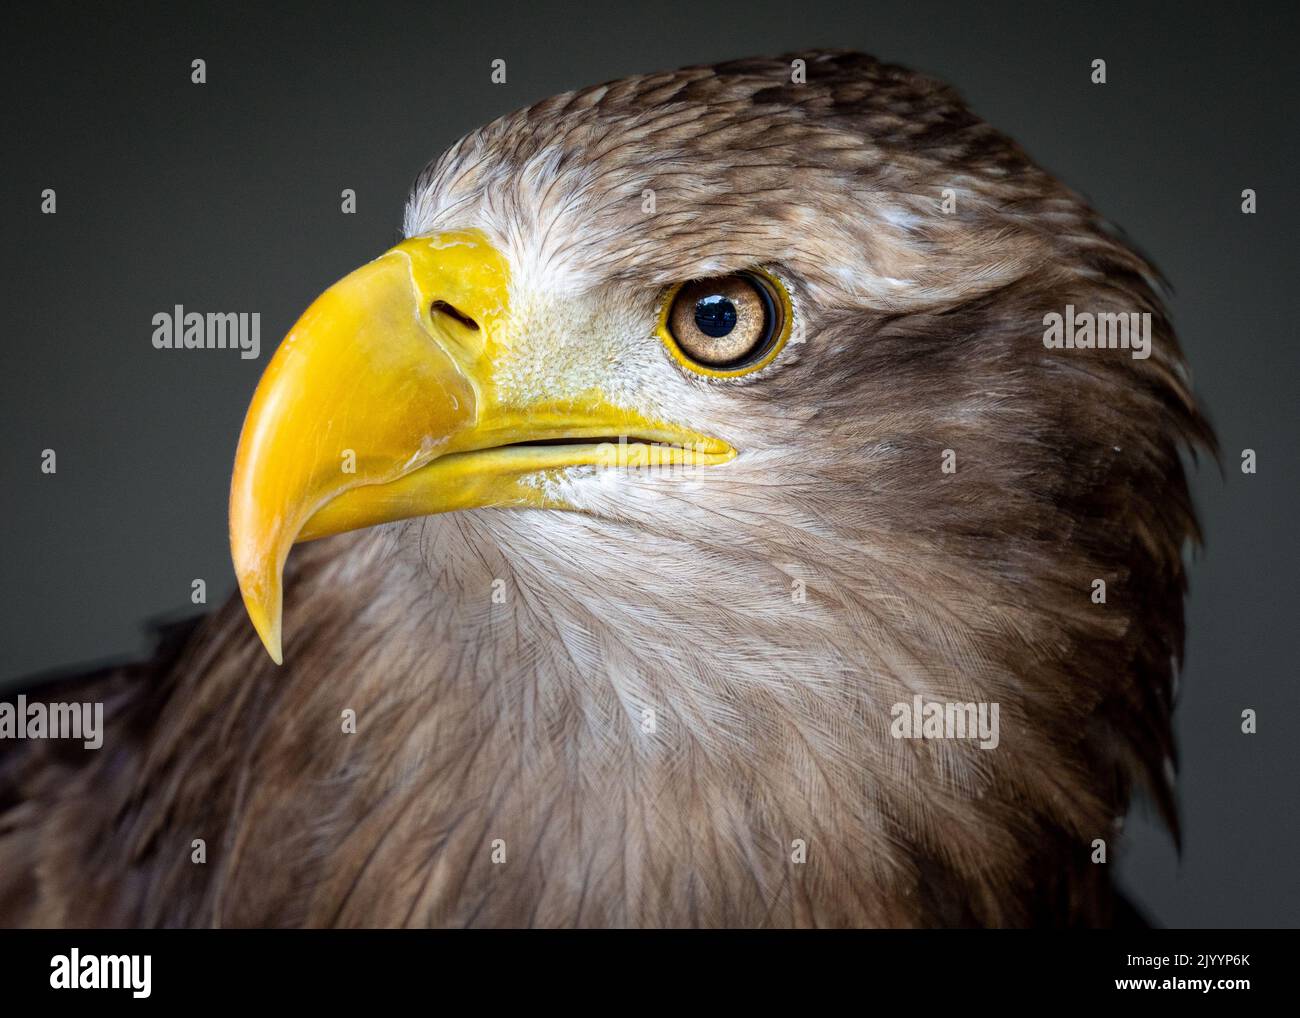 White Tailed Eagle Close-up profile view with a yellow beak and plain grey background Stock Photo